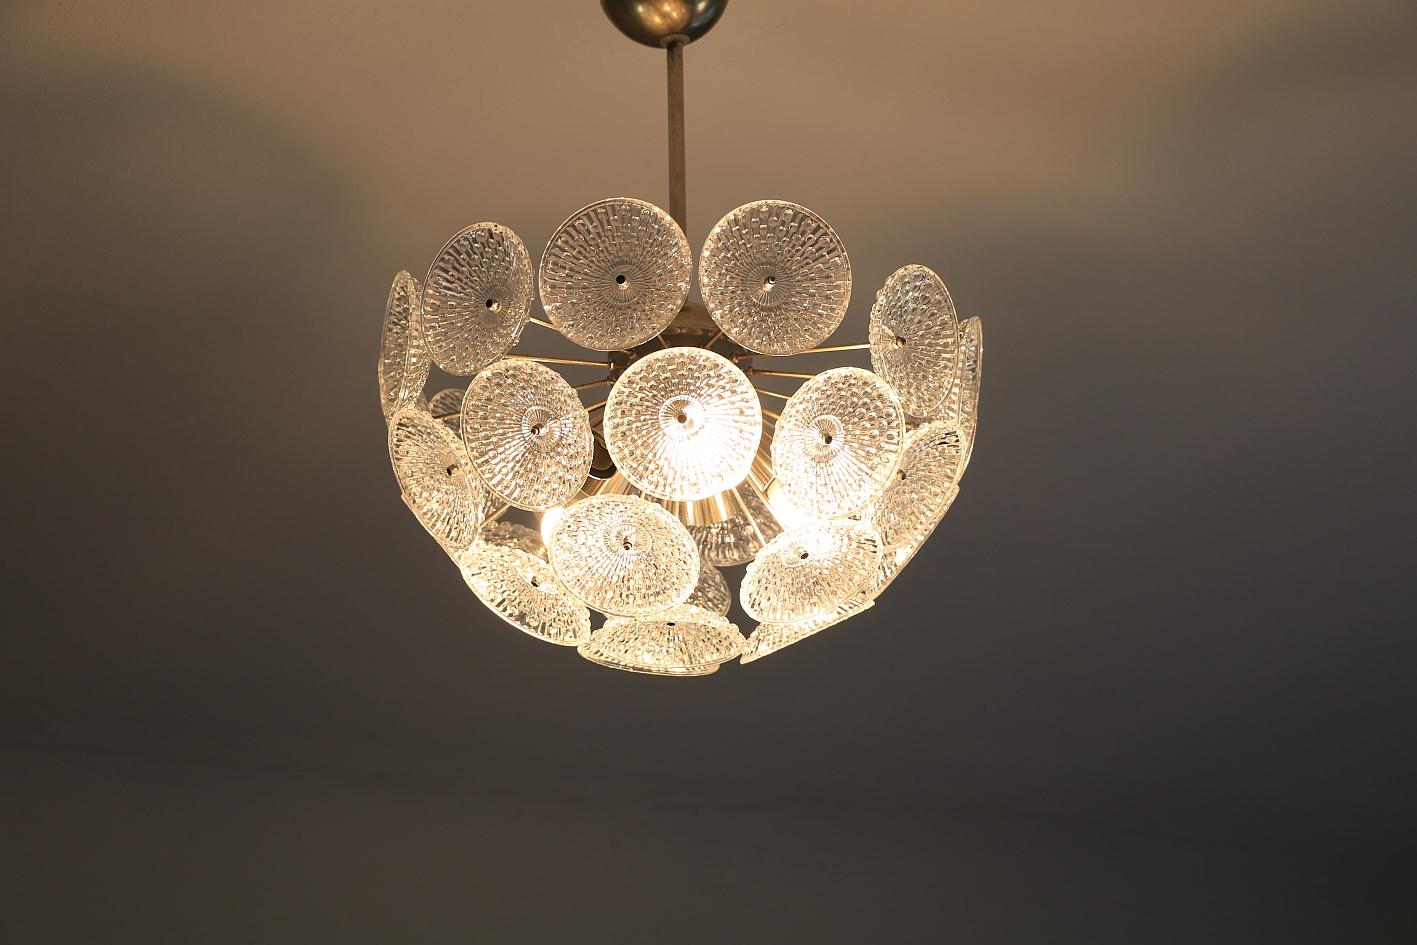 Super nice sputnik lamp with 28 glass plates.
In the design of a dandelion.
The discs are made of grinded glass and are located on filigree metal rods.

5 x E14 sockets, metal frame.
For the USA adapters are included.
 
Measures: Height: 60